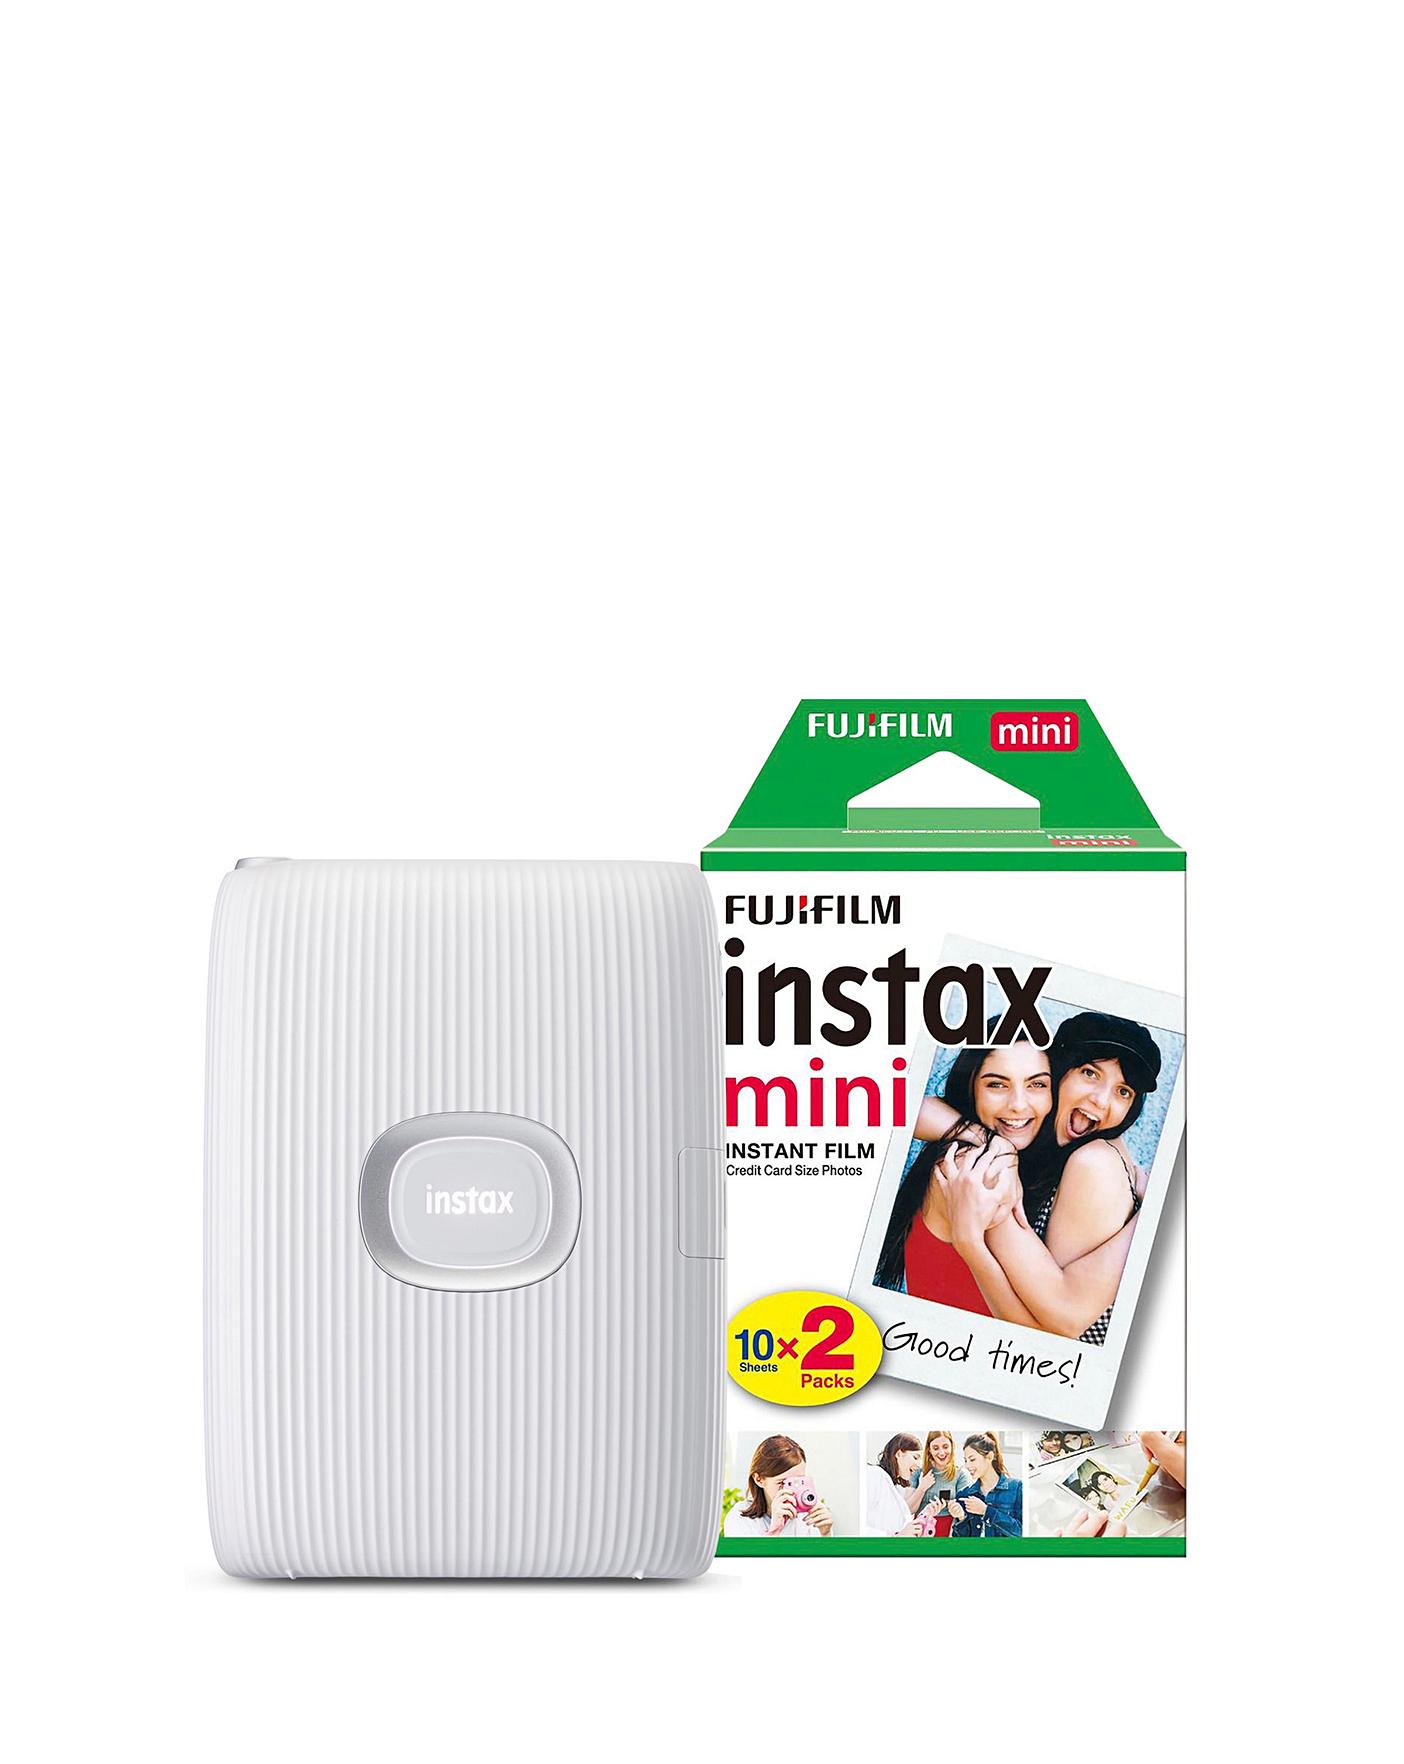 Fujifilm Instax Mini Link 2 Smartphone Photo Printer, Wireless, Portable,  and Lightweight Instant Film Printer, Bluetooth, Compatible on iPhone IOS  or